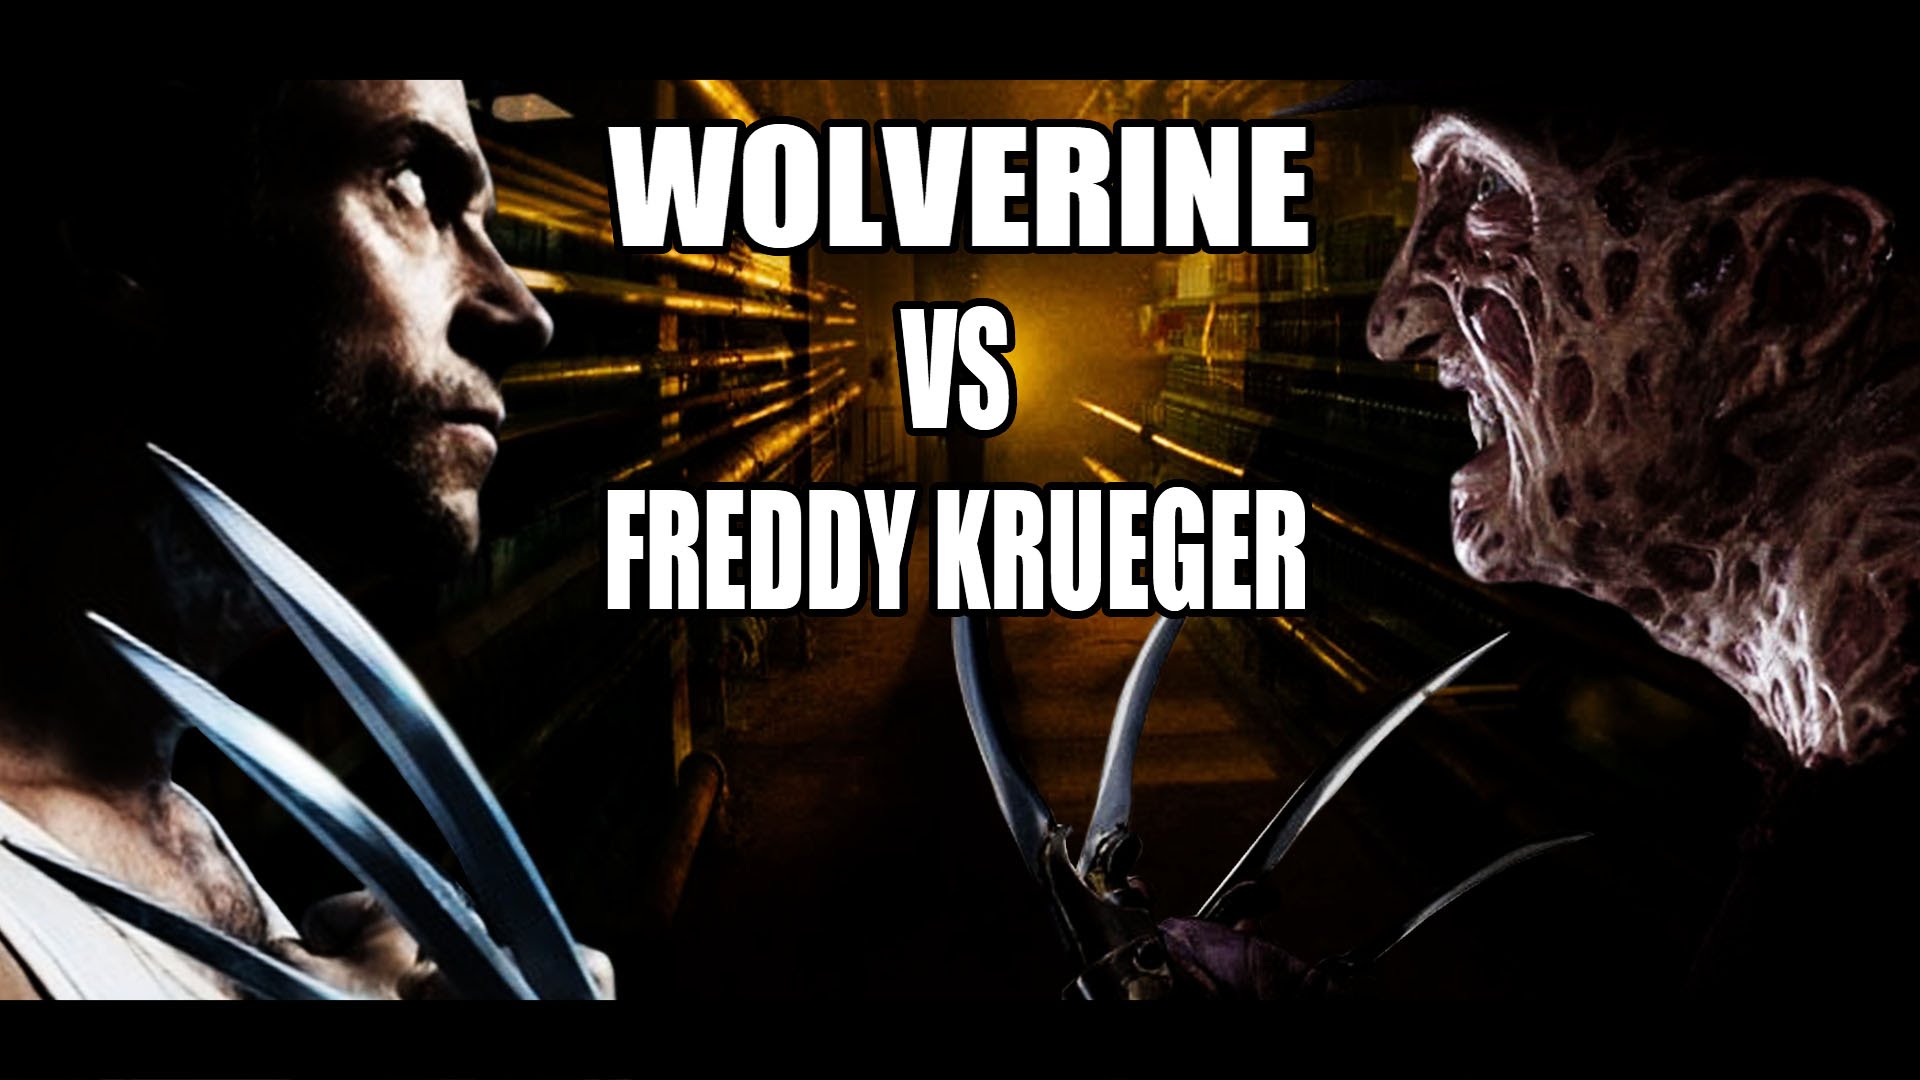 Amazing Wolverine Vs. Freddy Pictures & Backgrounds